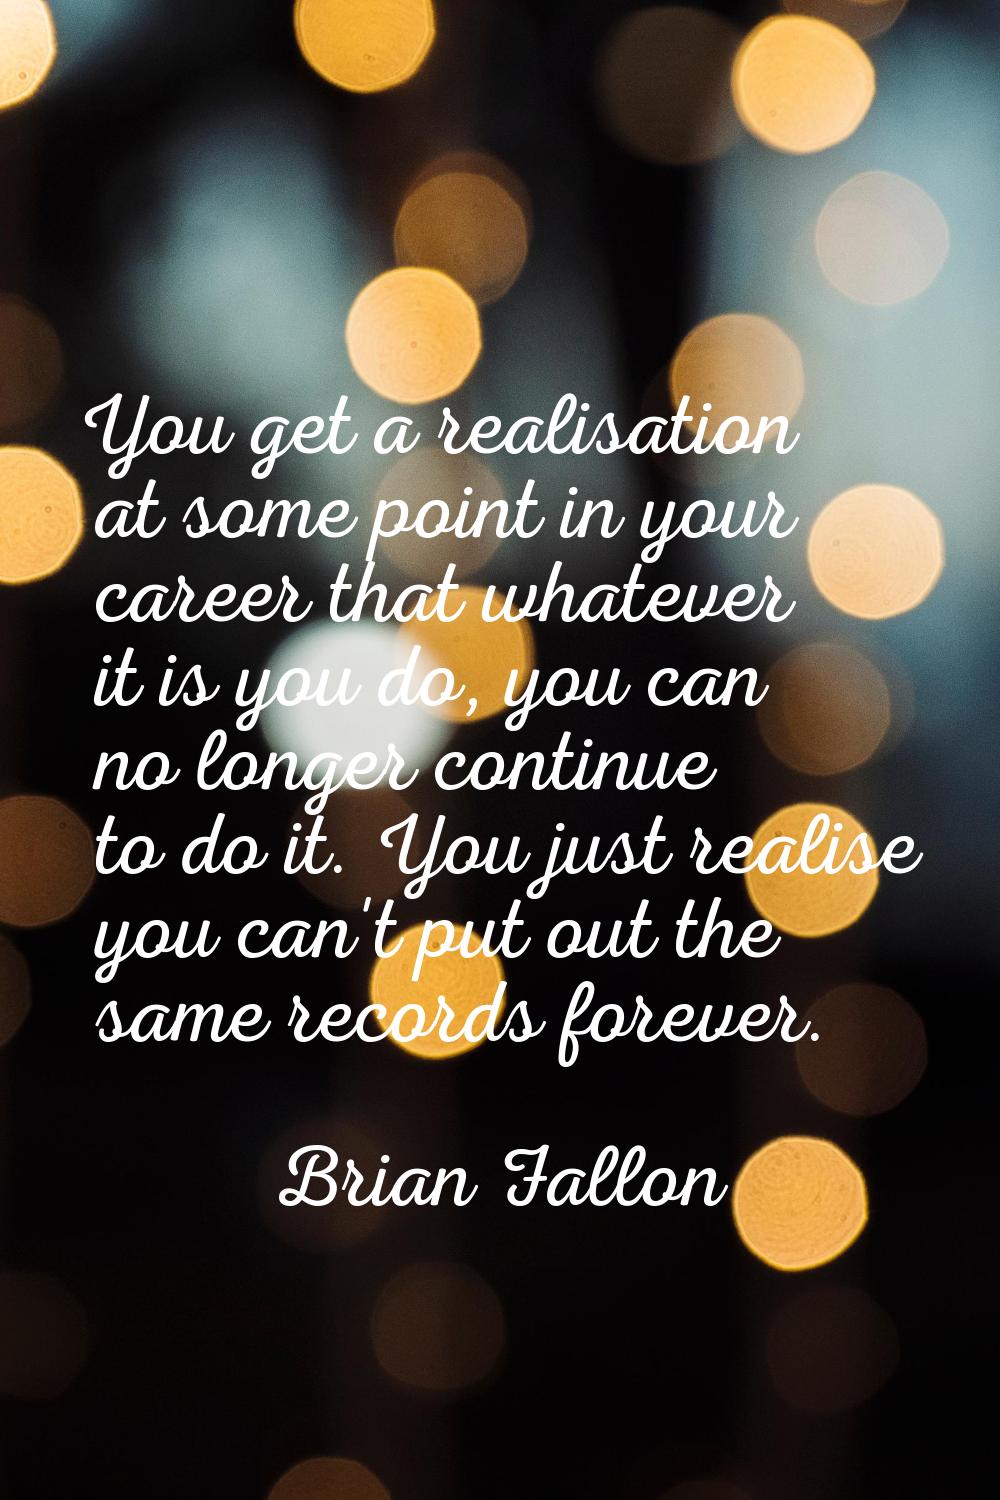 You get a realisation at some point in your career that whatever it is you do, you can no longer co